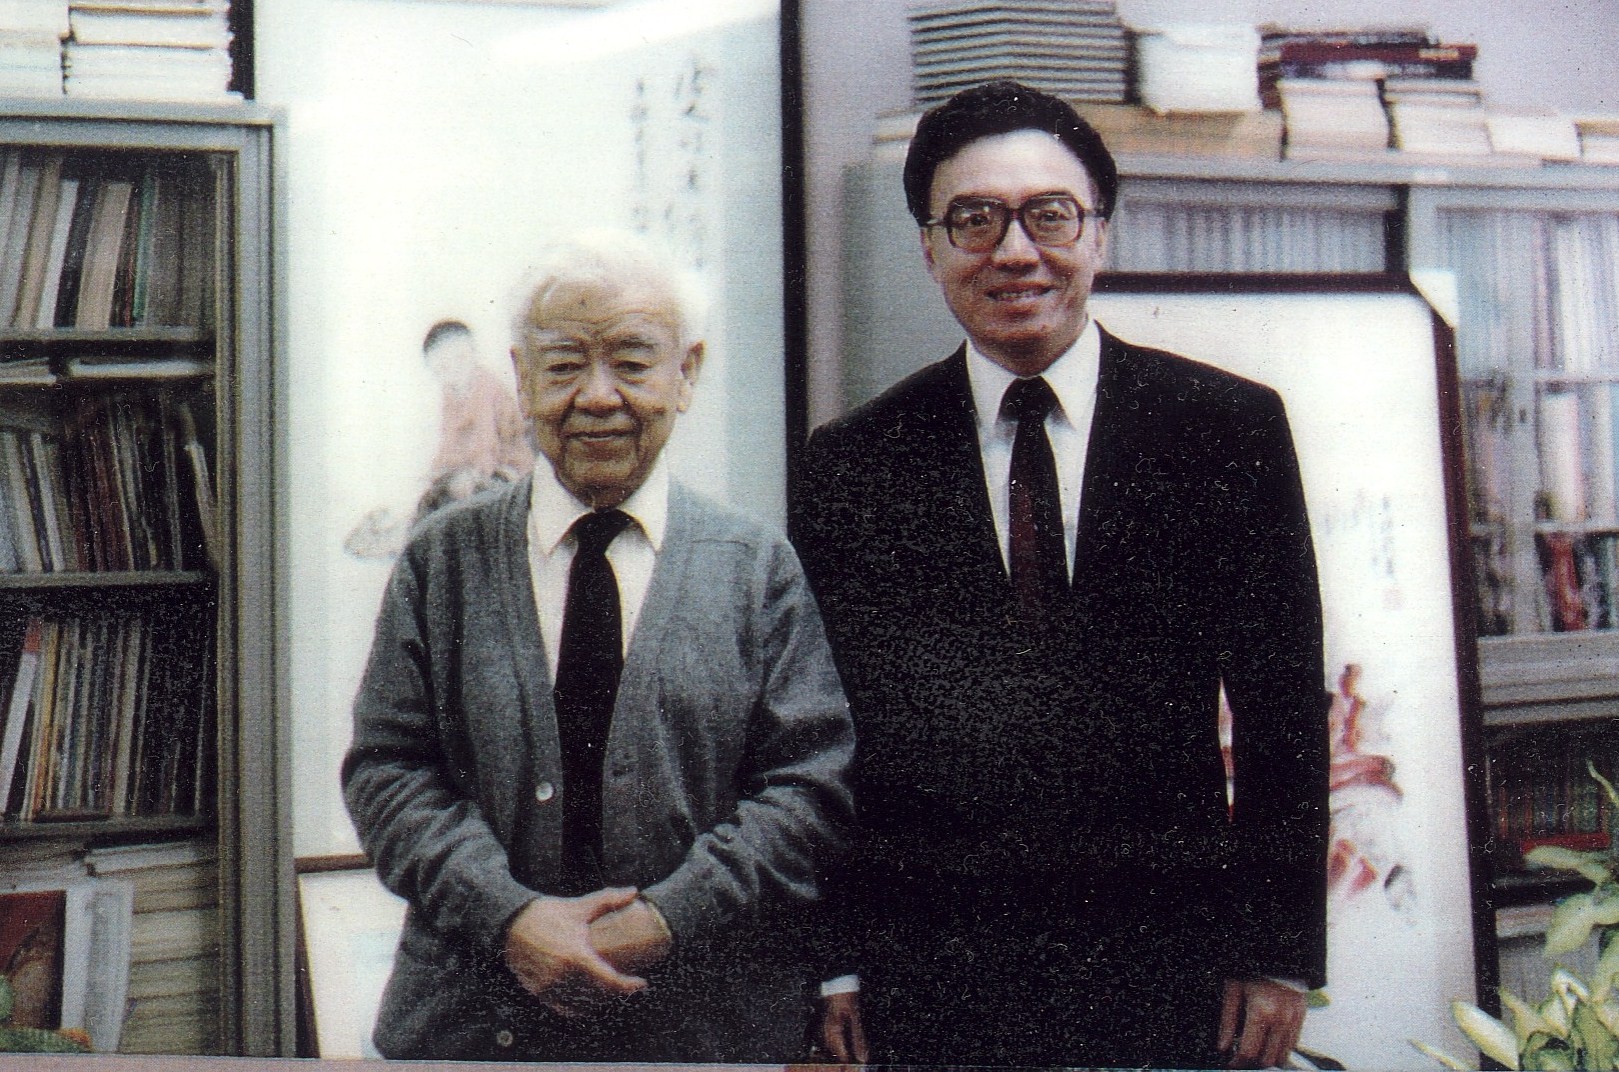 Ta-You Wu and Hugh Ching (founders of Post-Science Institute with C. V. Ramamoorthy and T. L. Kunii). Click to learn about Ta-You Wu and his collaboration with Hugh Ching and Post-Science Institute.